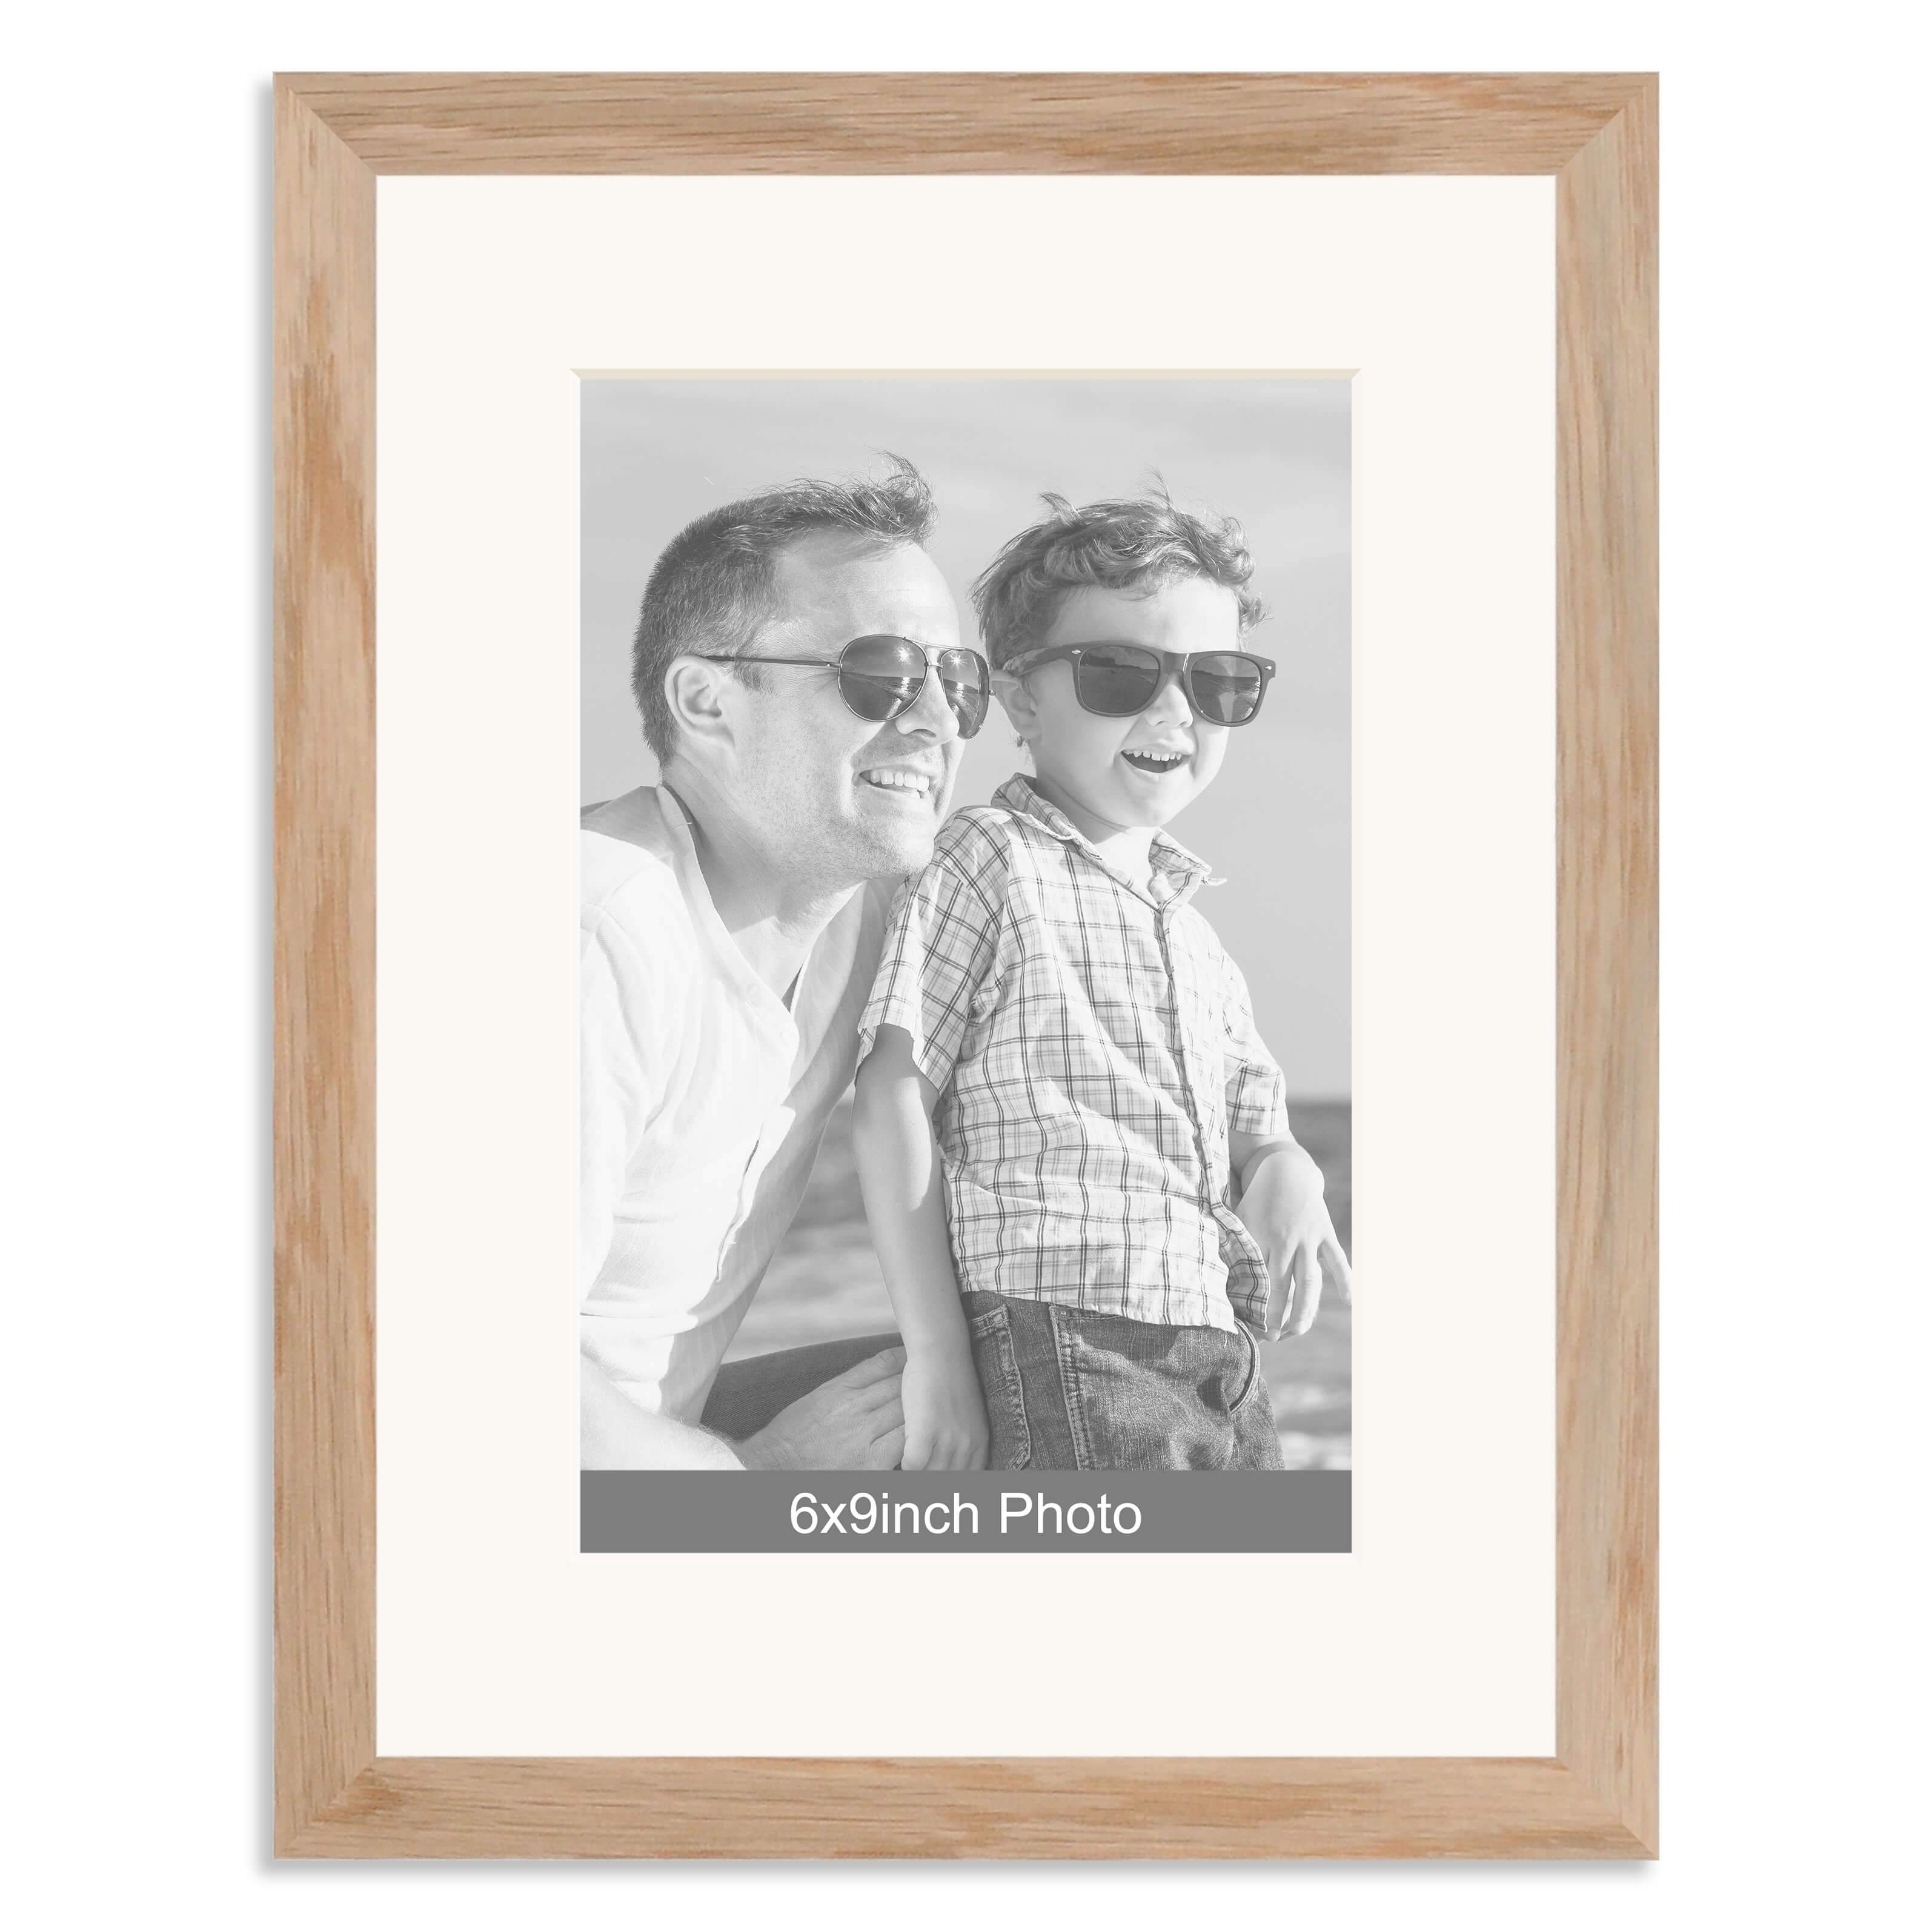 Solid Oak Photo Frame with mount for a 9×6/6x9in Photo – Photo to follow by email